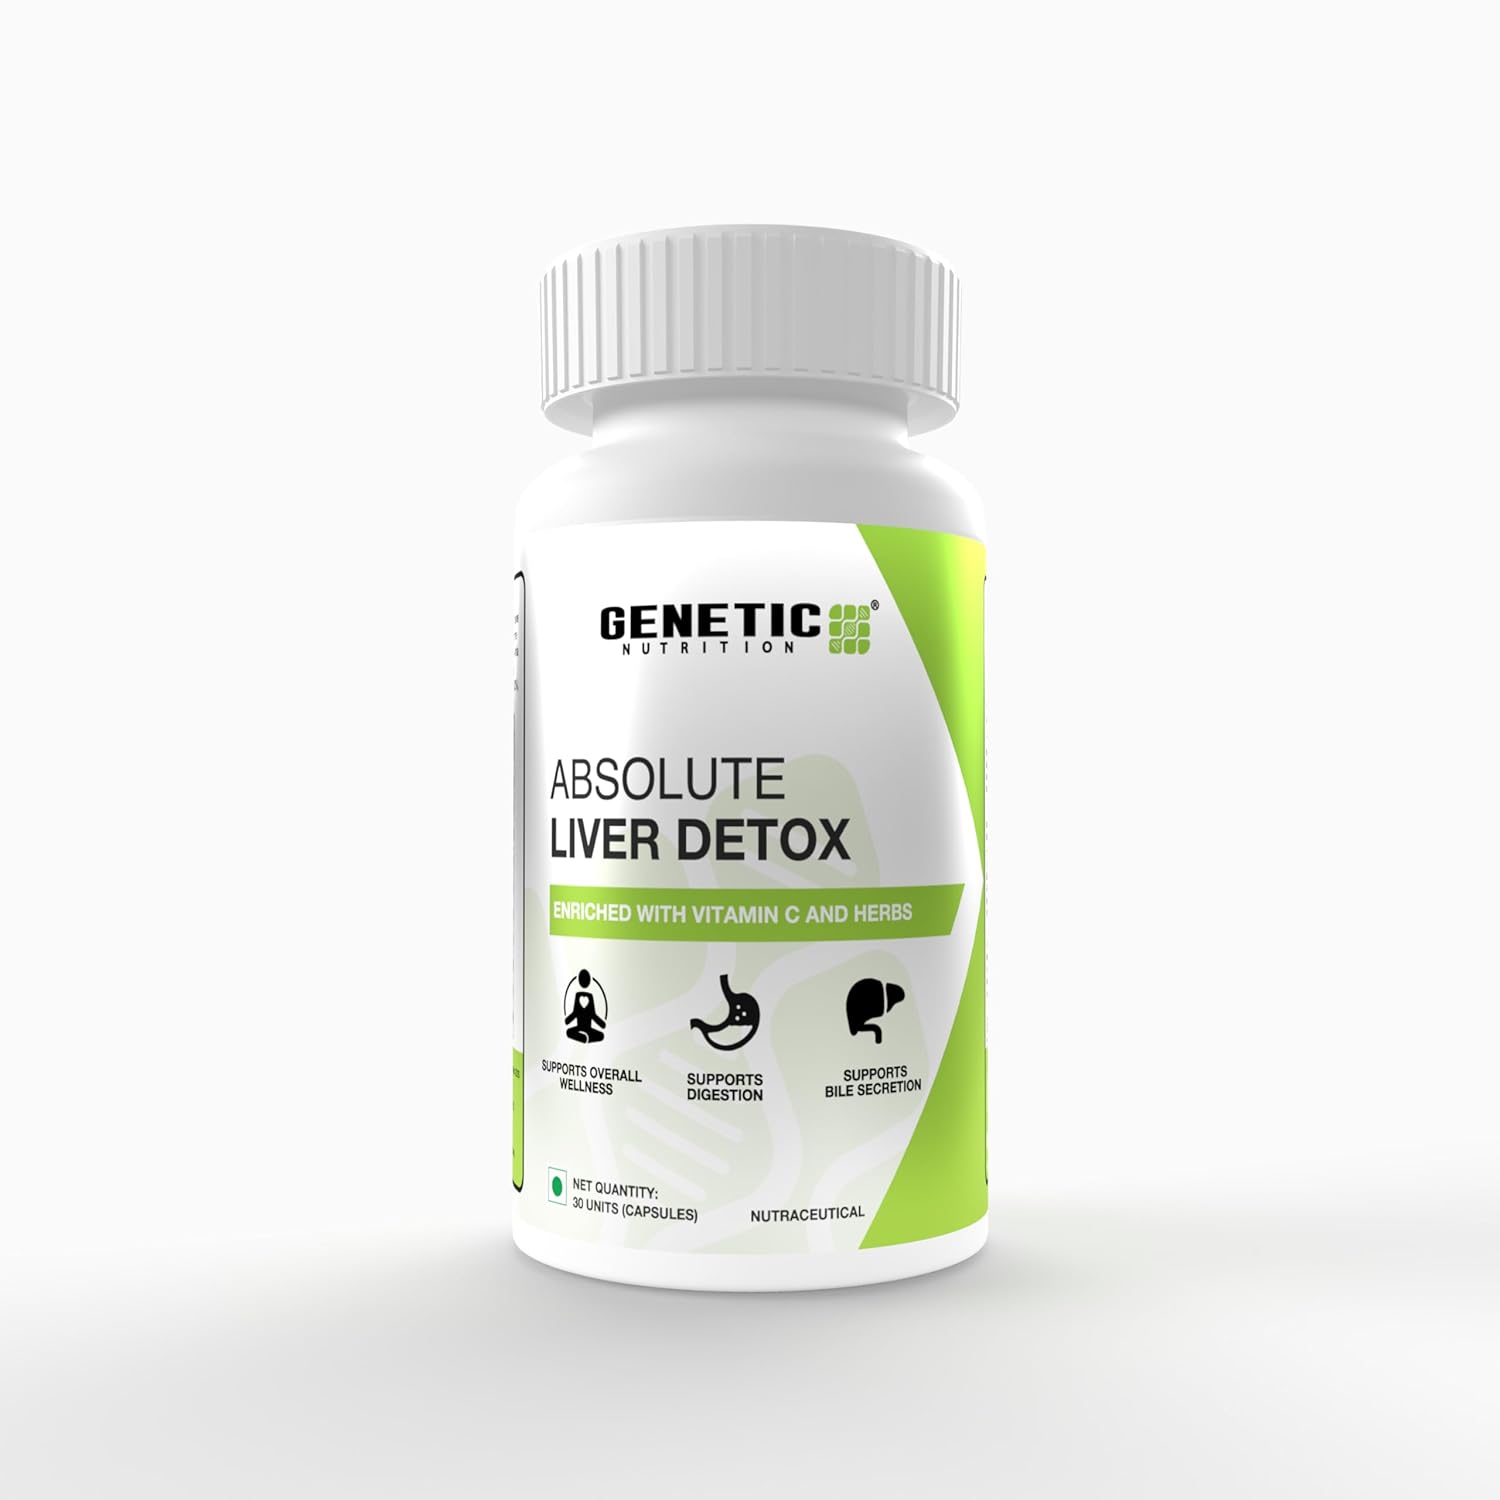 Genetic Nutrition Grass-Fed Whey  Whey Protein Concentrate Powder